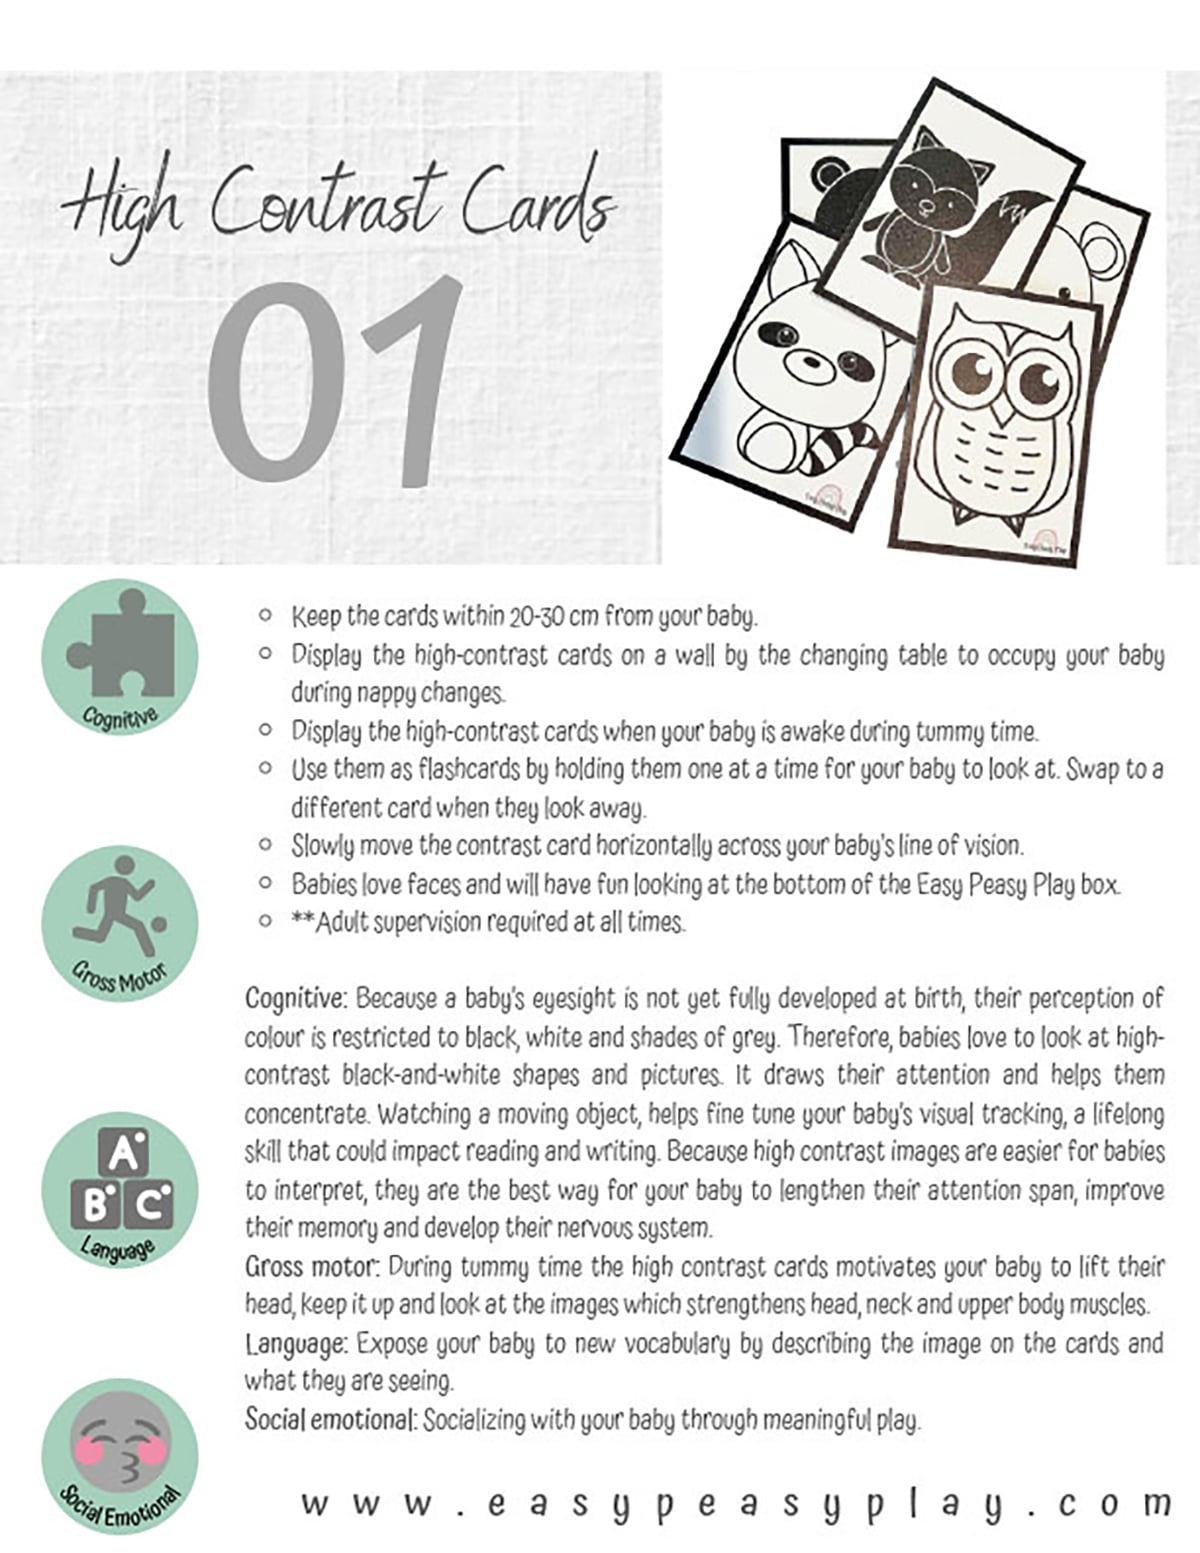 High contrast cards for meaningful play